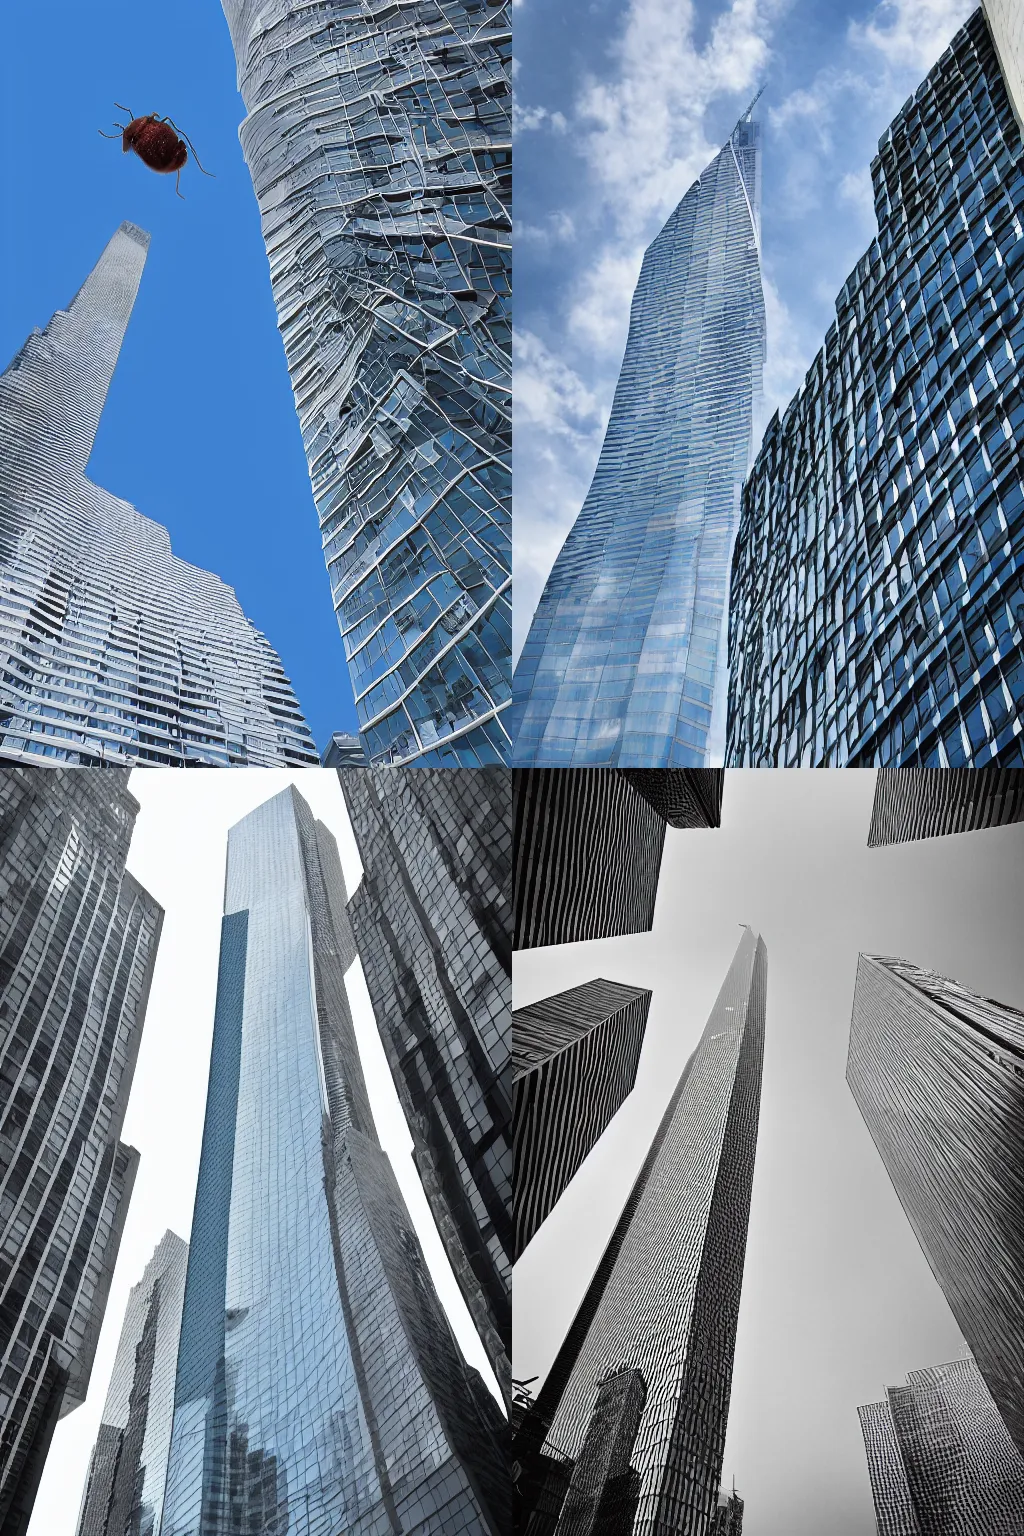 Prompt: photograph of a skyscraper from the perspective of an ant